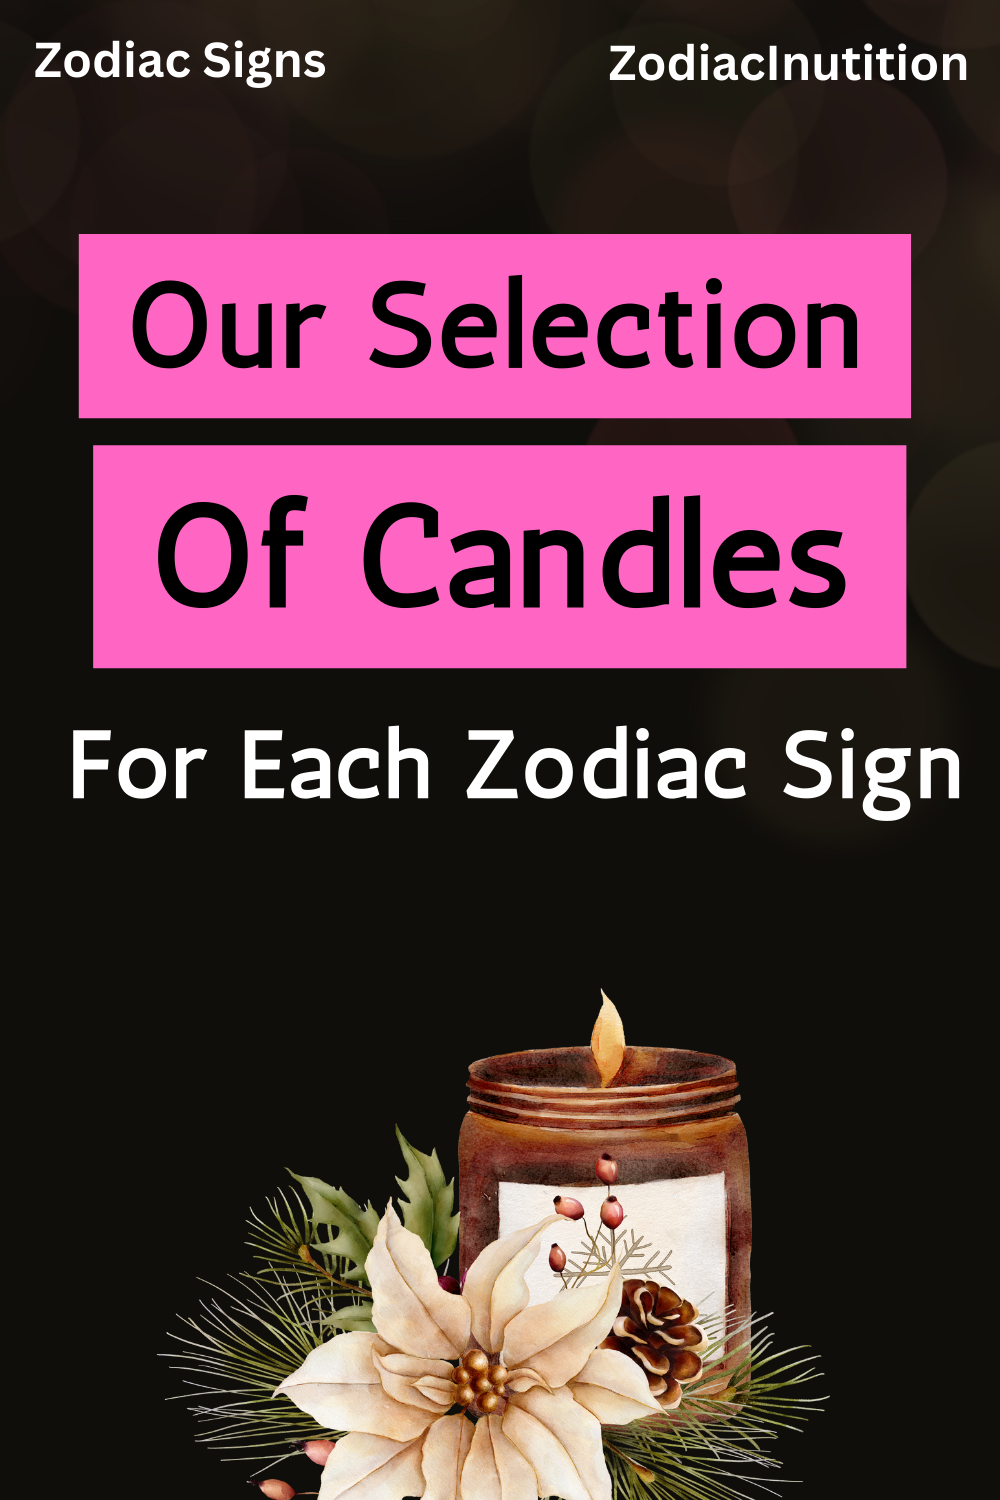 Our Selection Of Candles For Each Zodiac Sign